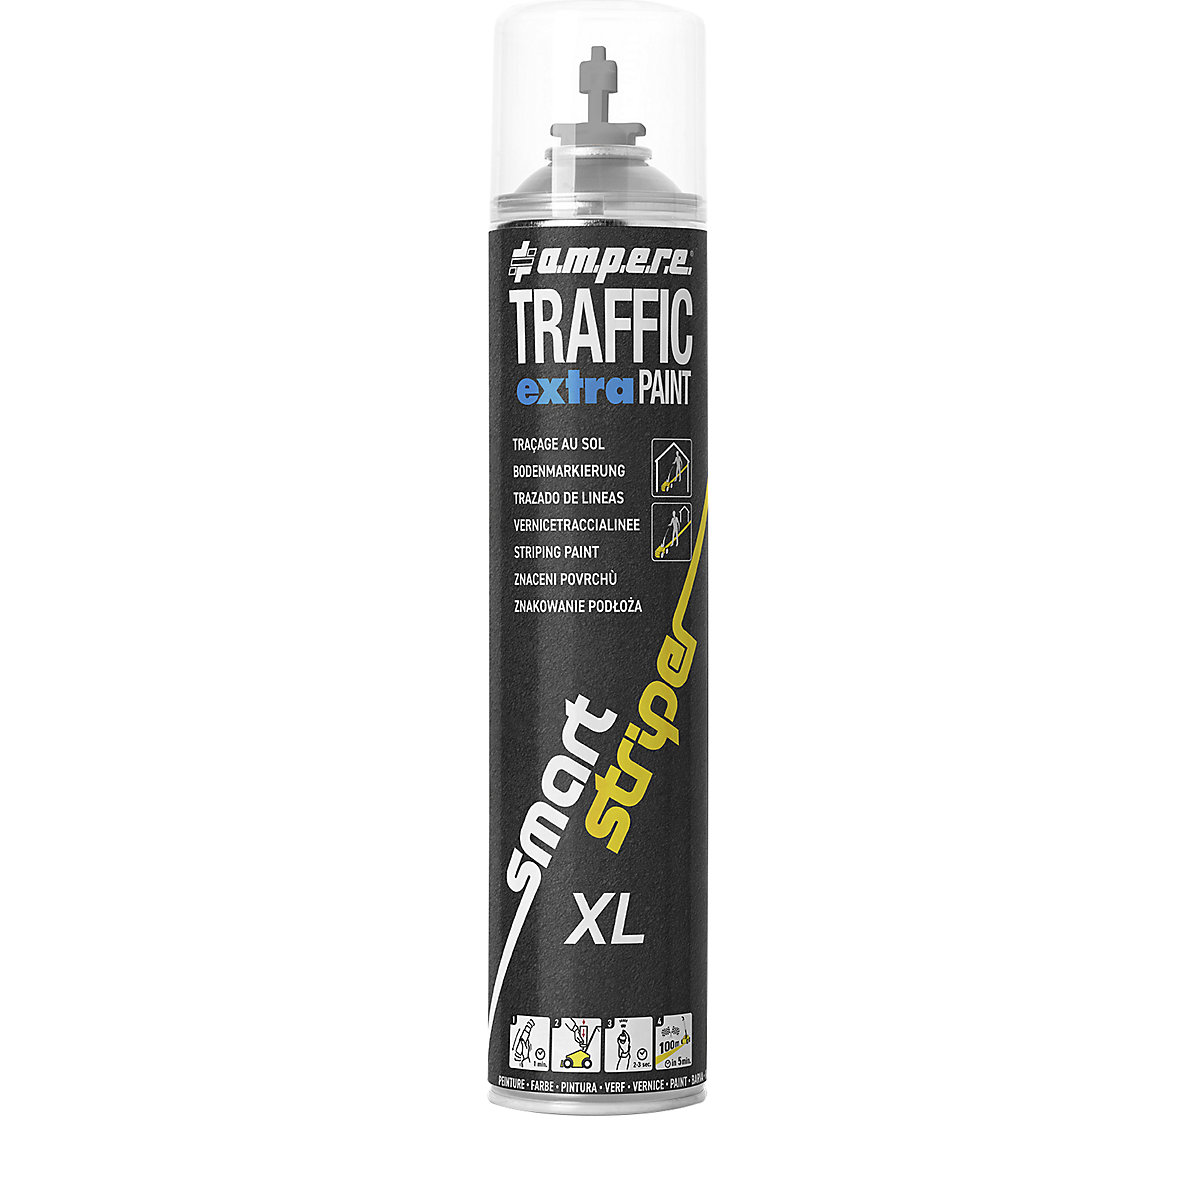 Traffic extra Paint® XL marking paint - Ampere